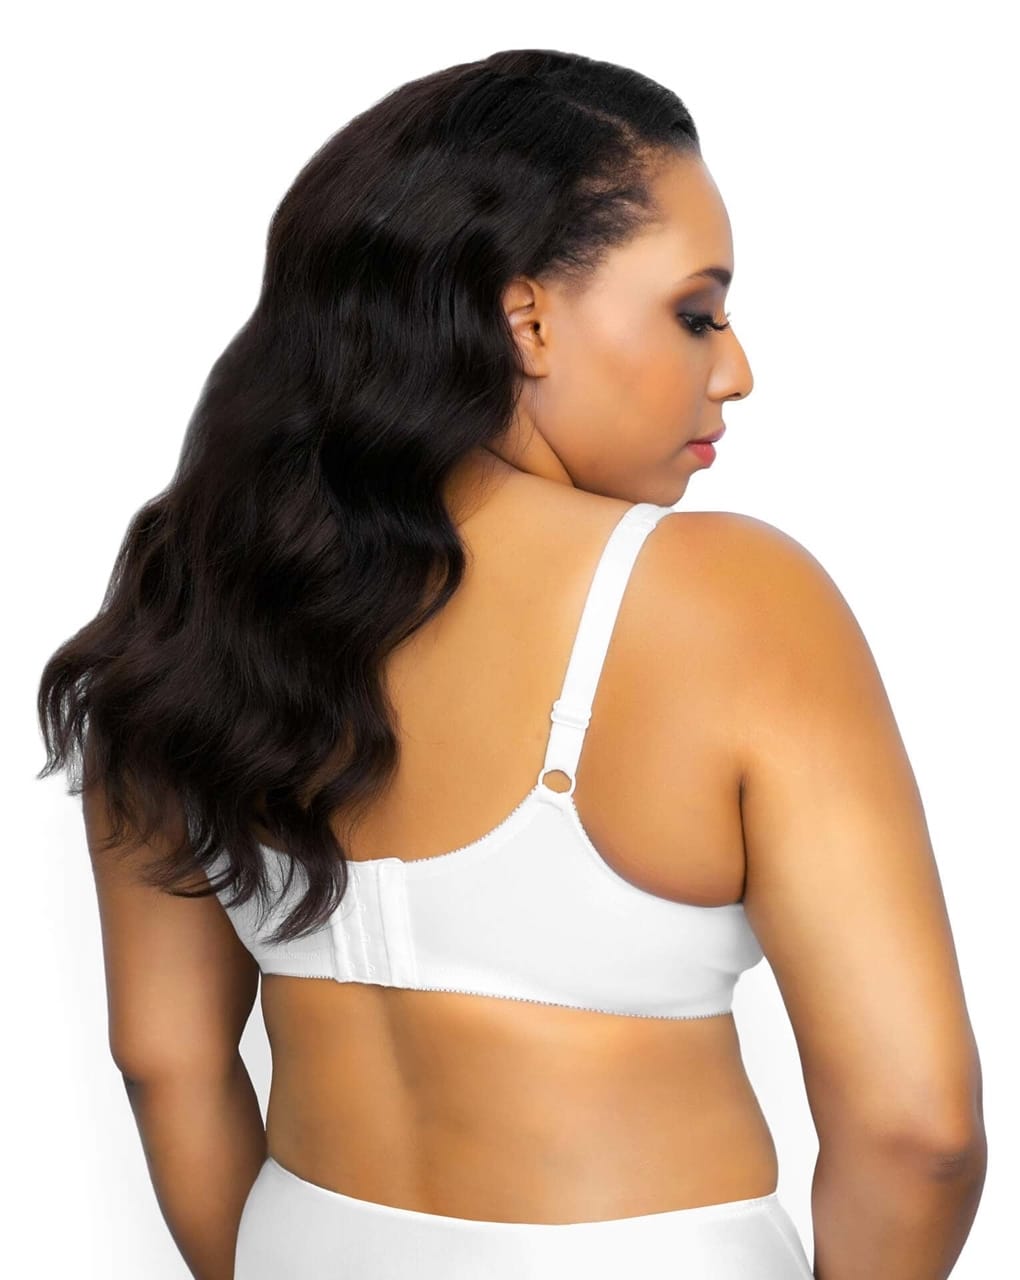  Exquisite Form FULLY Soft Cup Bra, Wire-Free